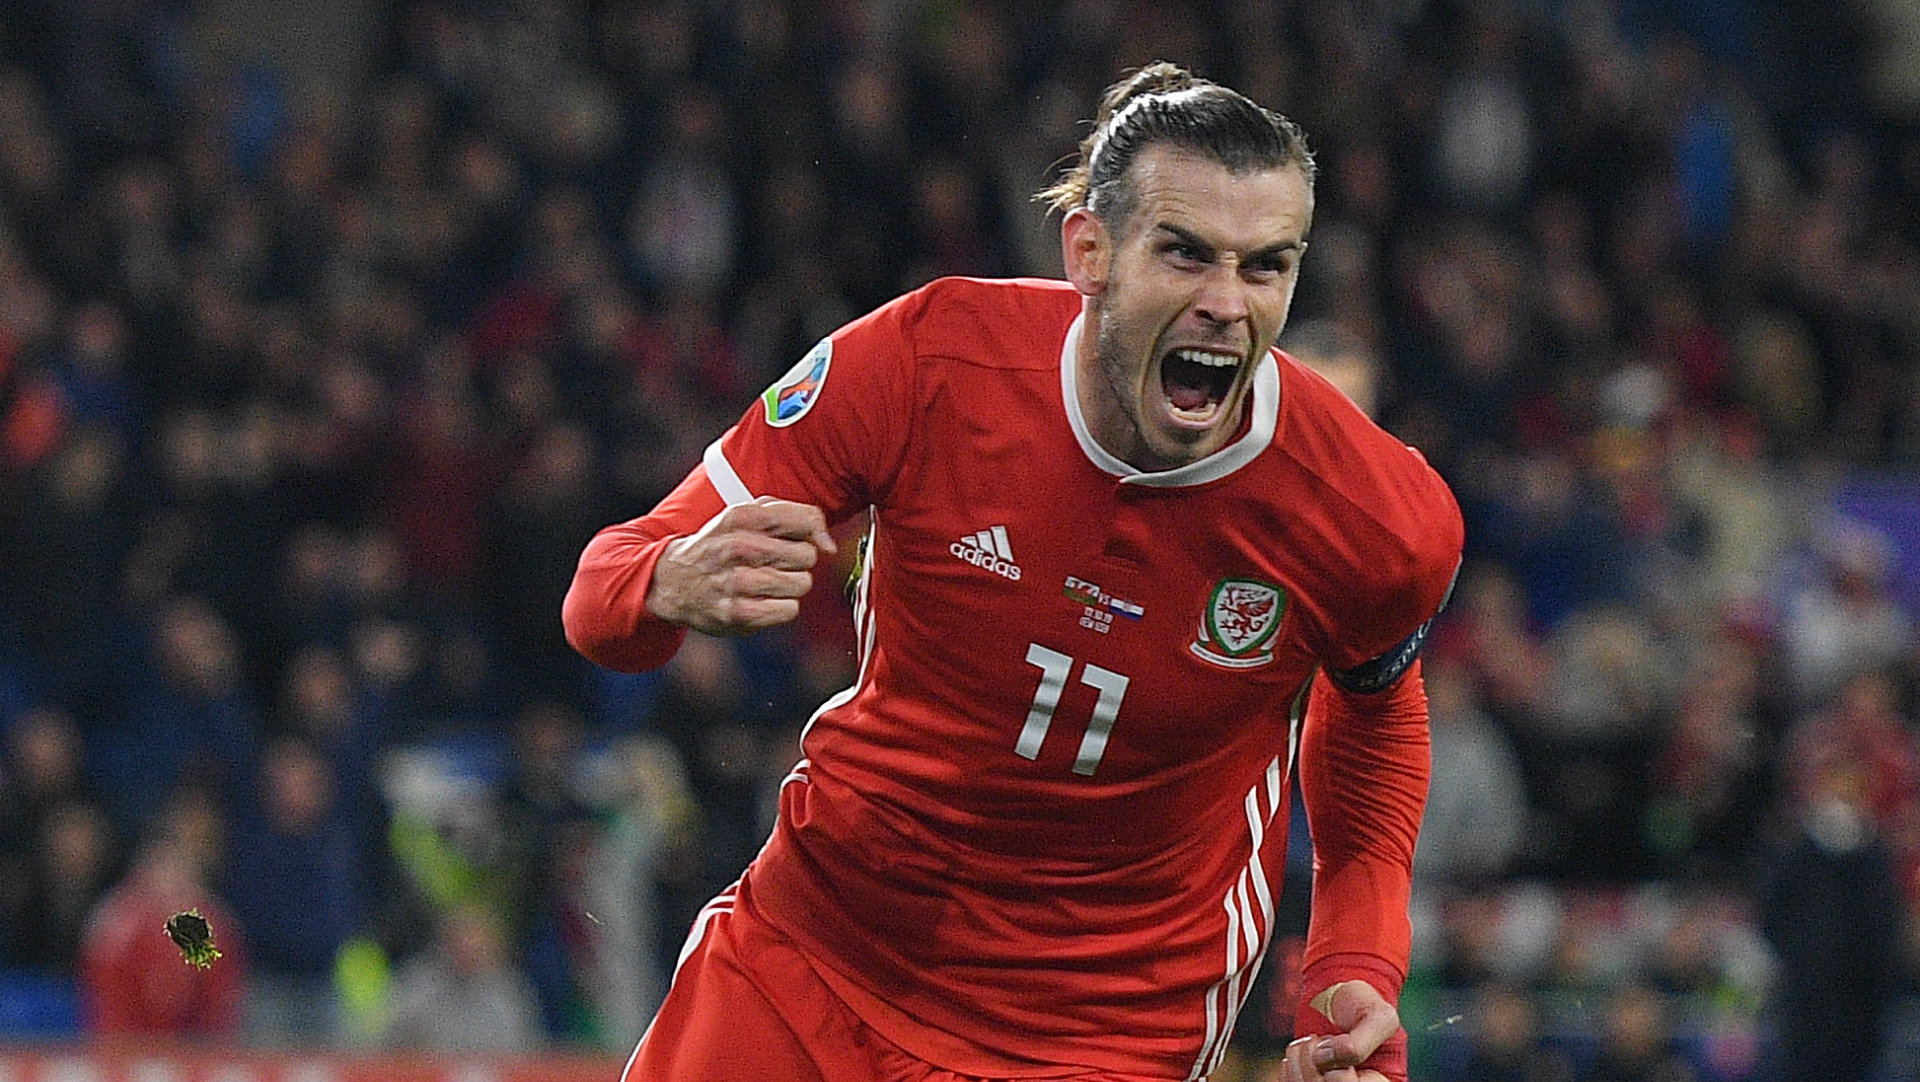 Gareth Bale gives his approval to his new 'Wales, Golf, Madrid' song